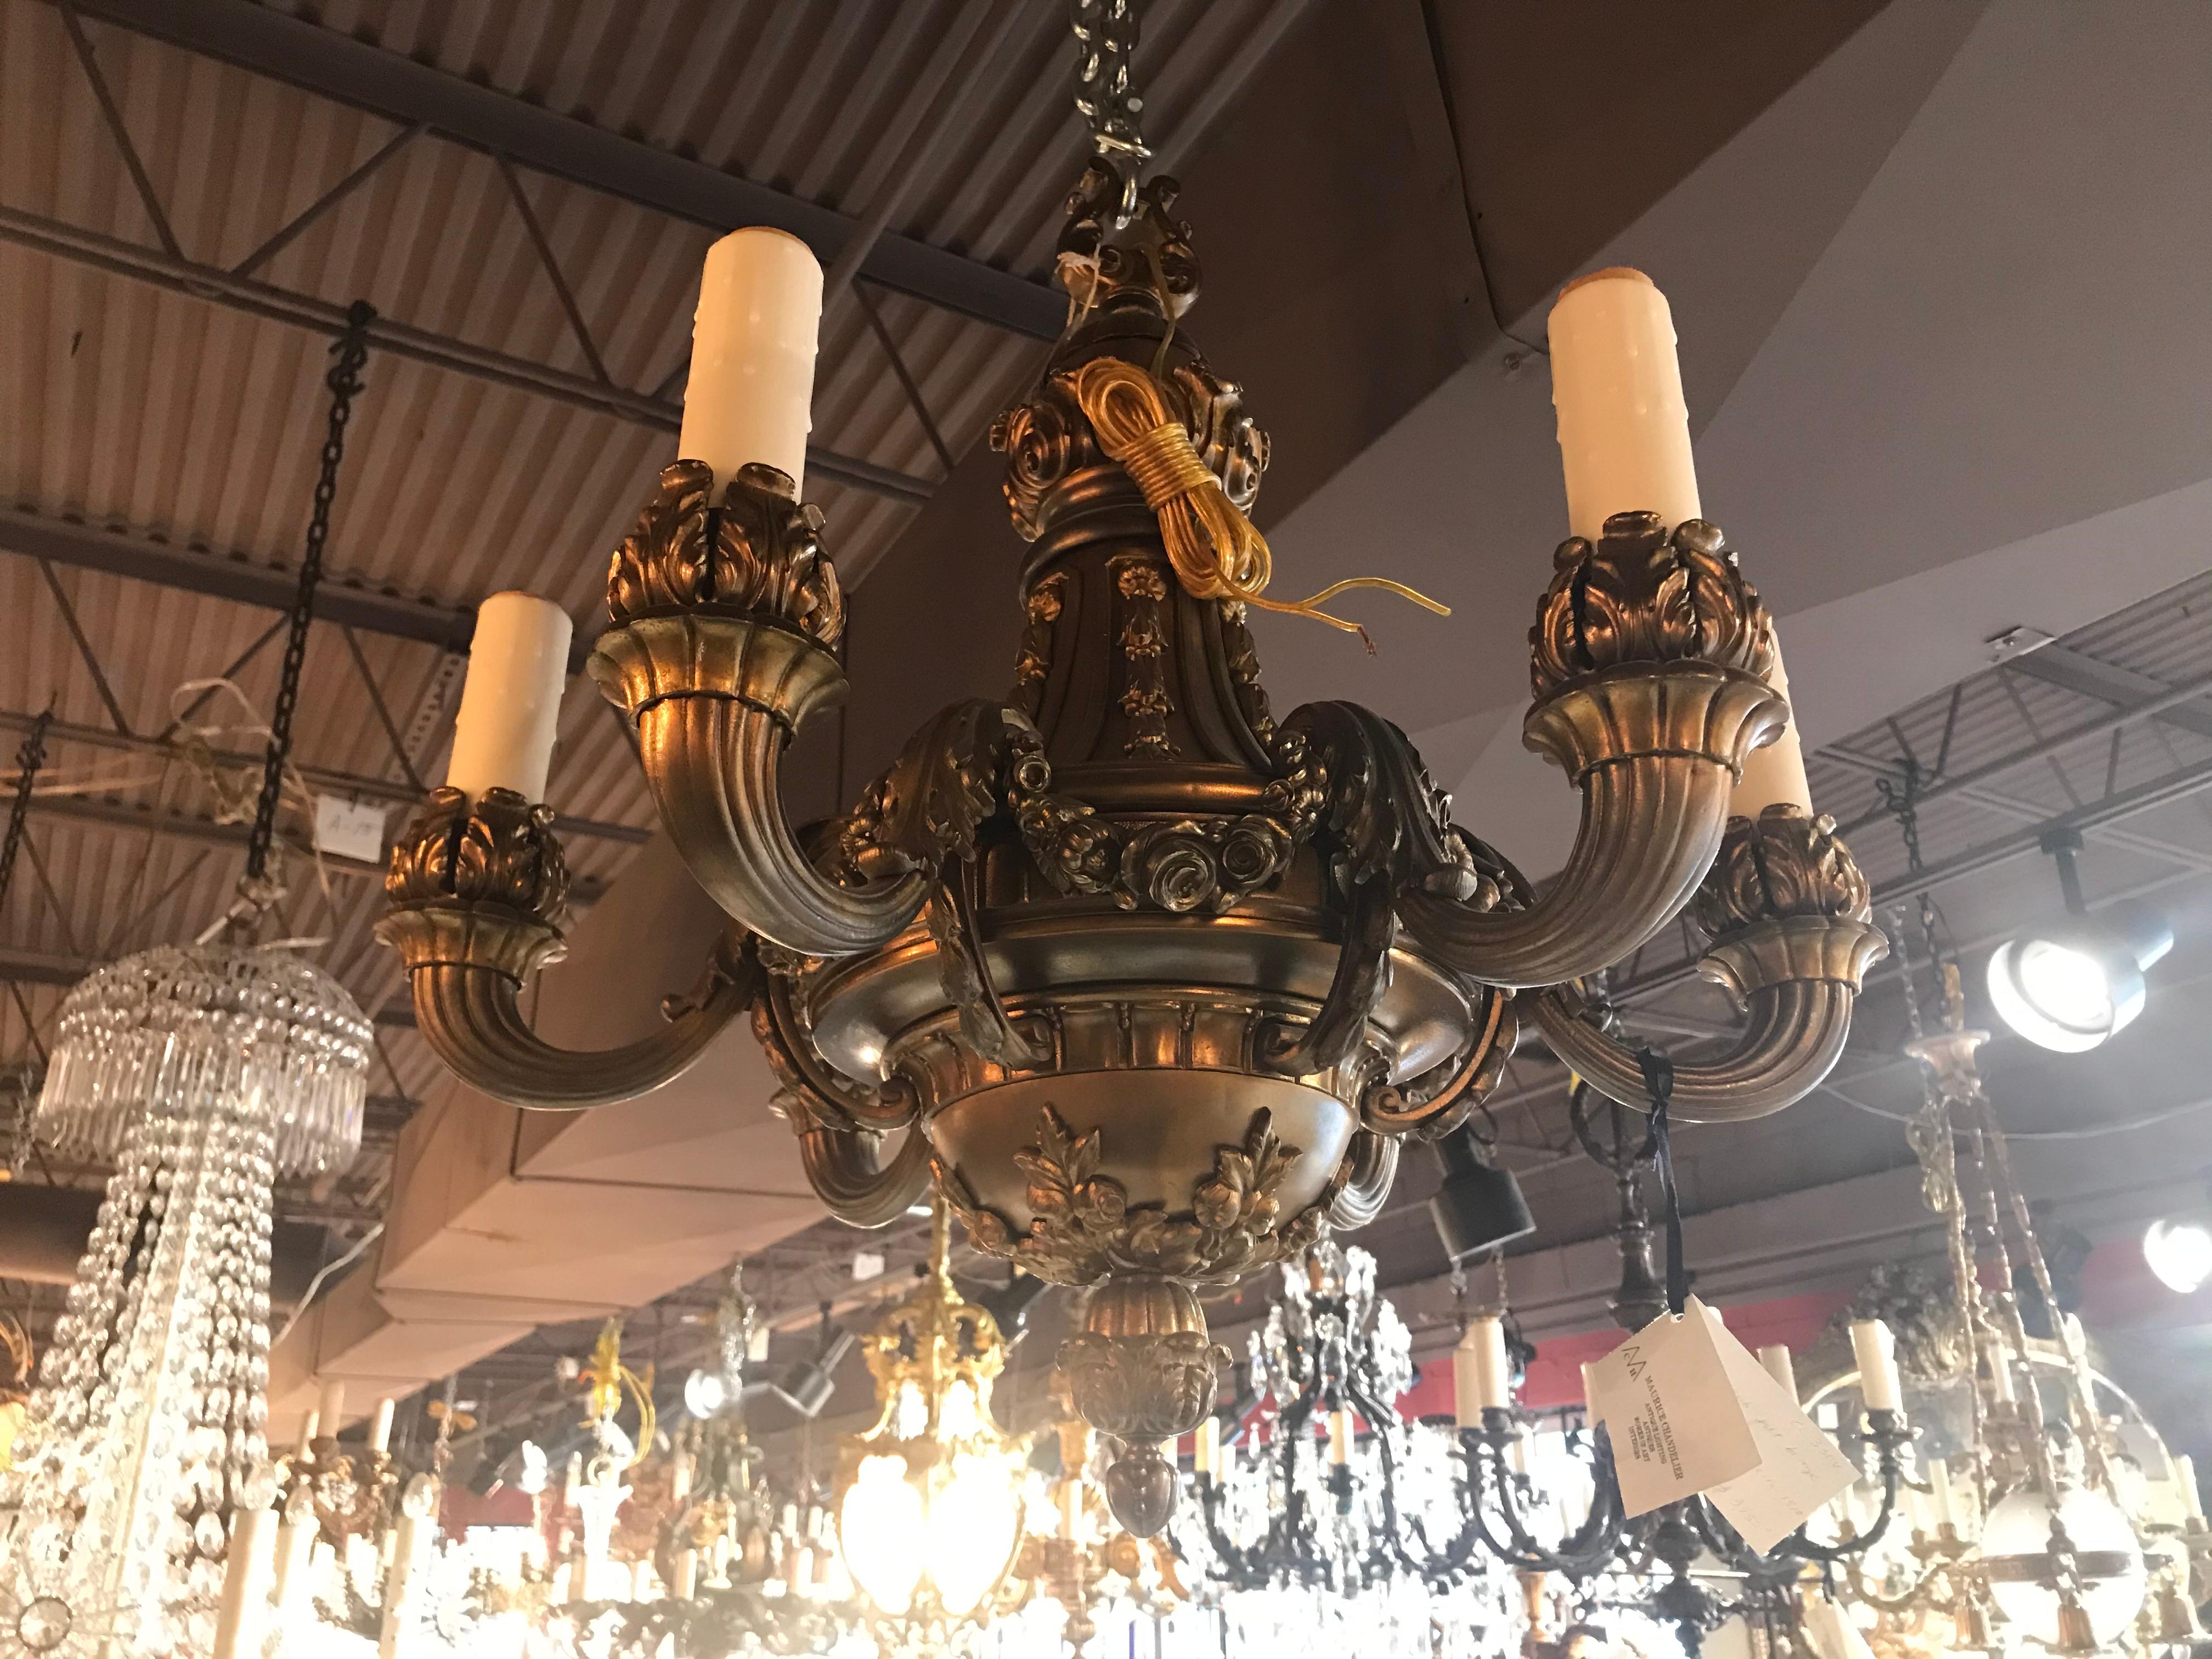 A very fine Regence style bronze chandelier. Great detail and quality. 5-light
France, circa 1900
Dimensions: Height 20